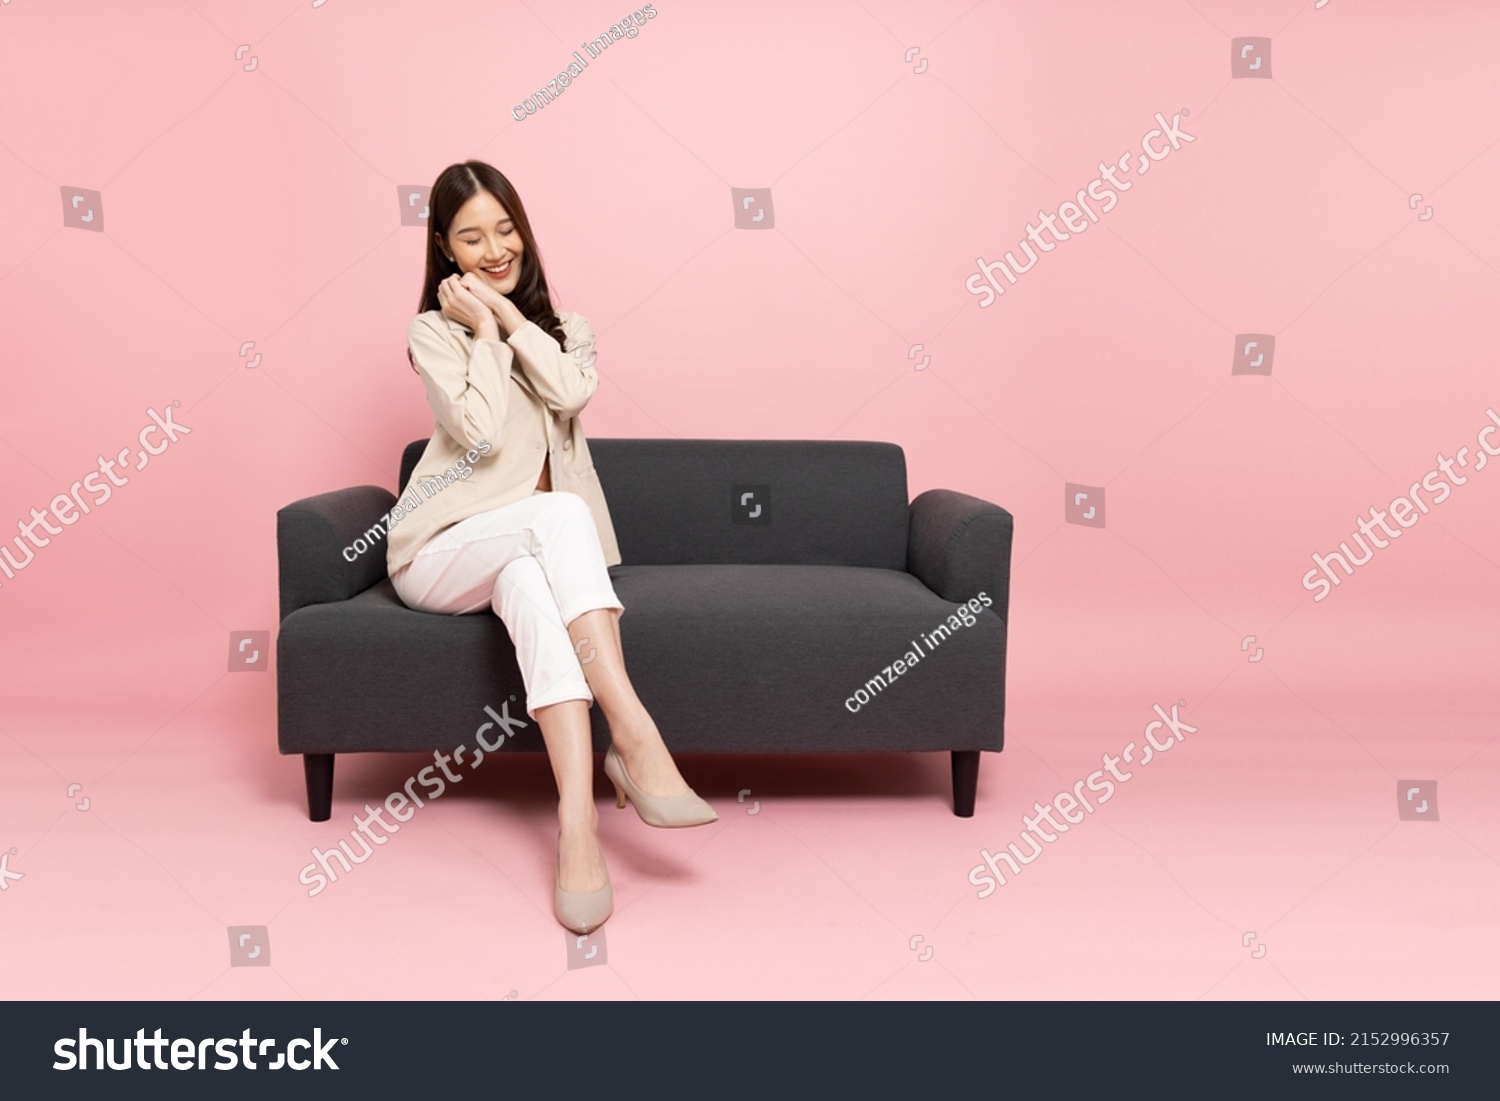 Excited Asian businesswoman sitting on sofa isolated on pink background #2152996357